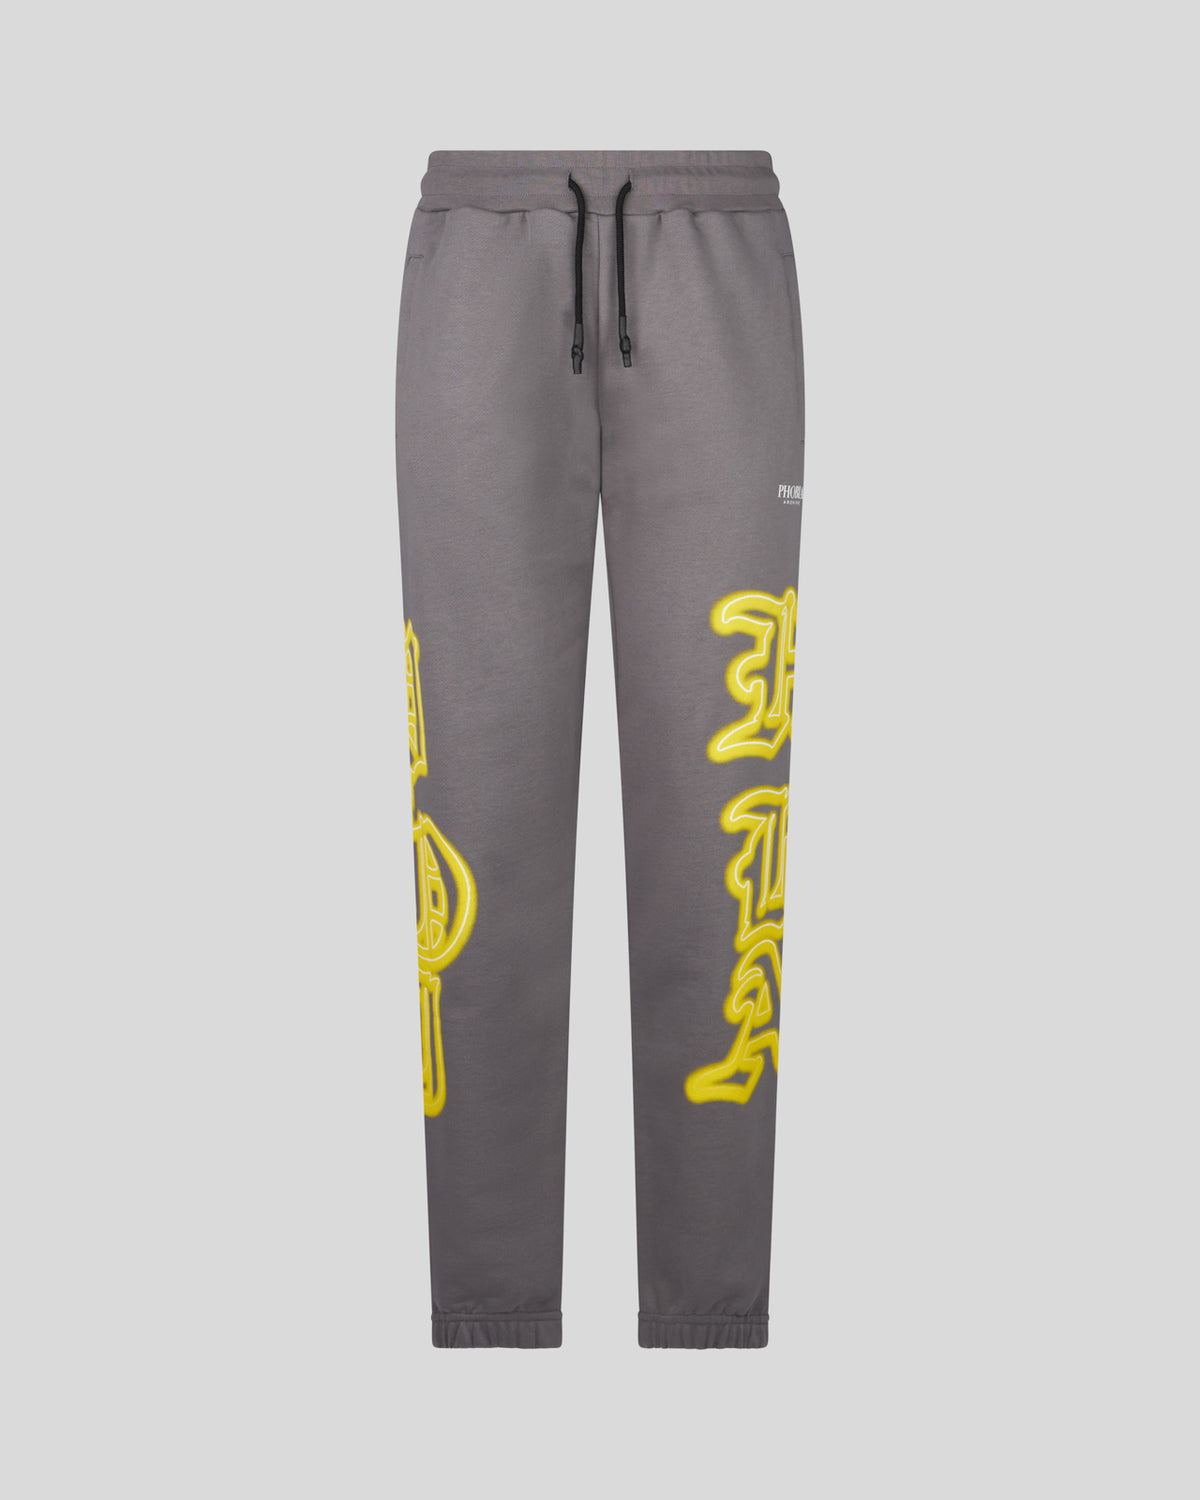 PHOBIA GREY PANT WITH GOTHIC SK PRINT